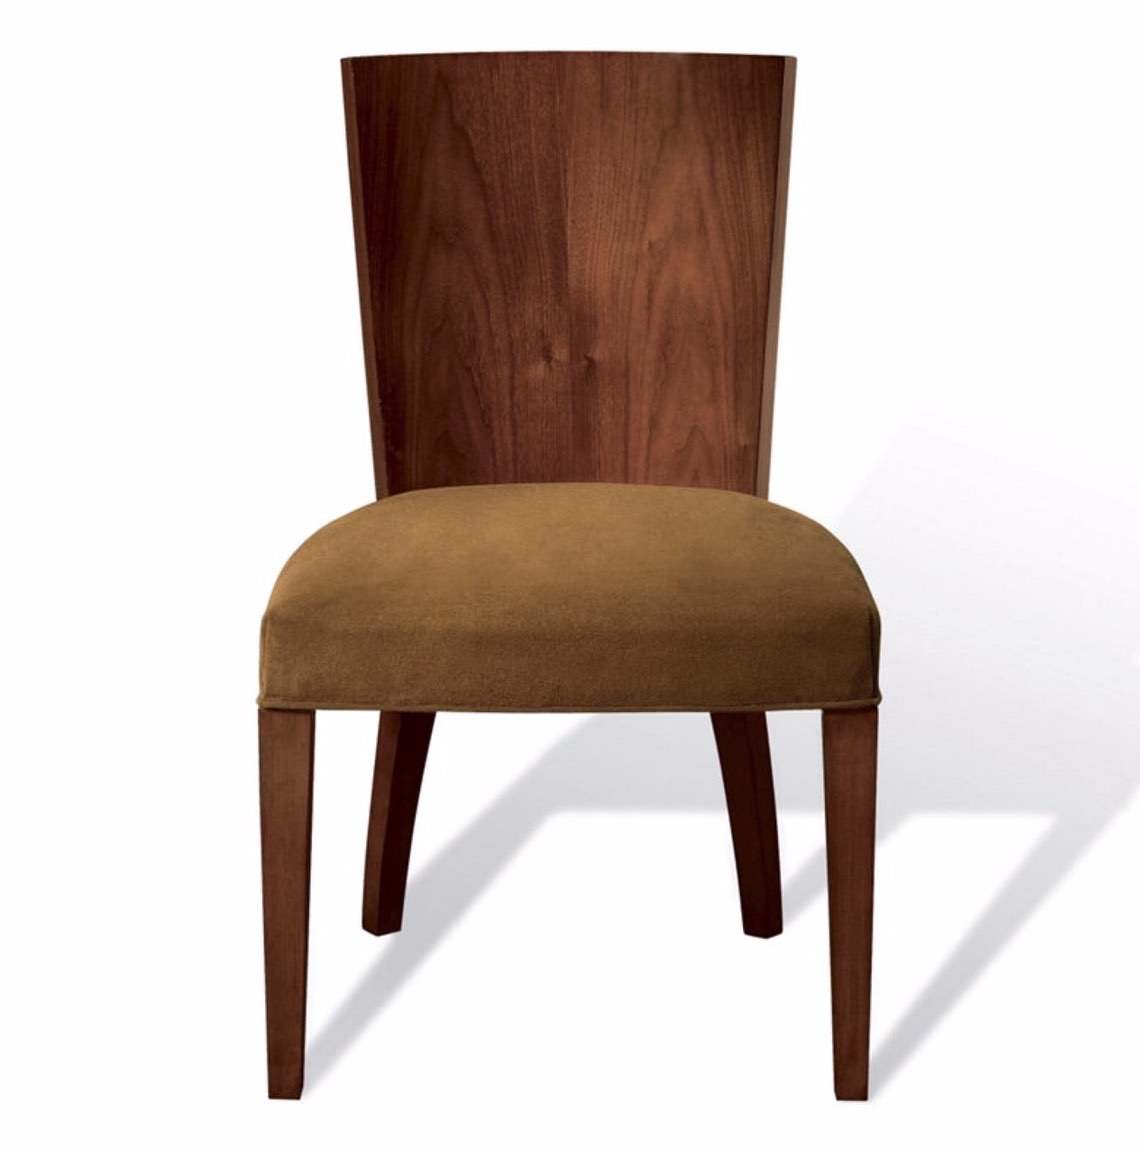 Made to Order Kitchen Furniture. - Dining Chairs 002-01